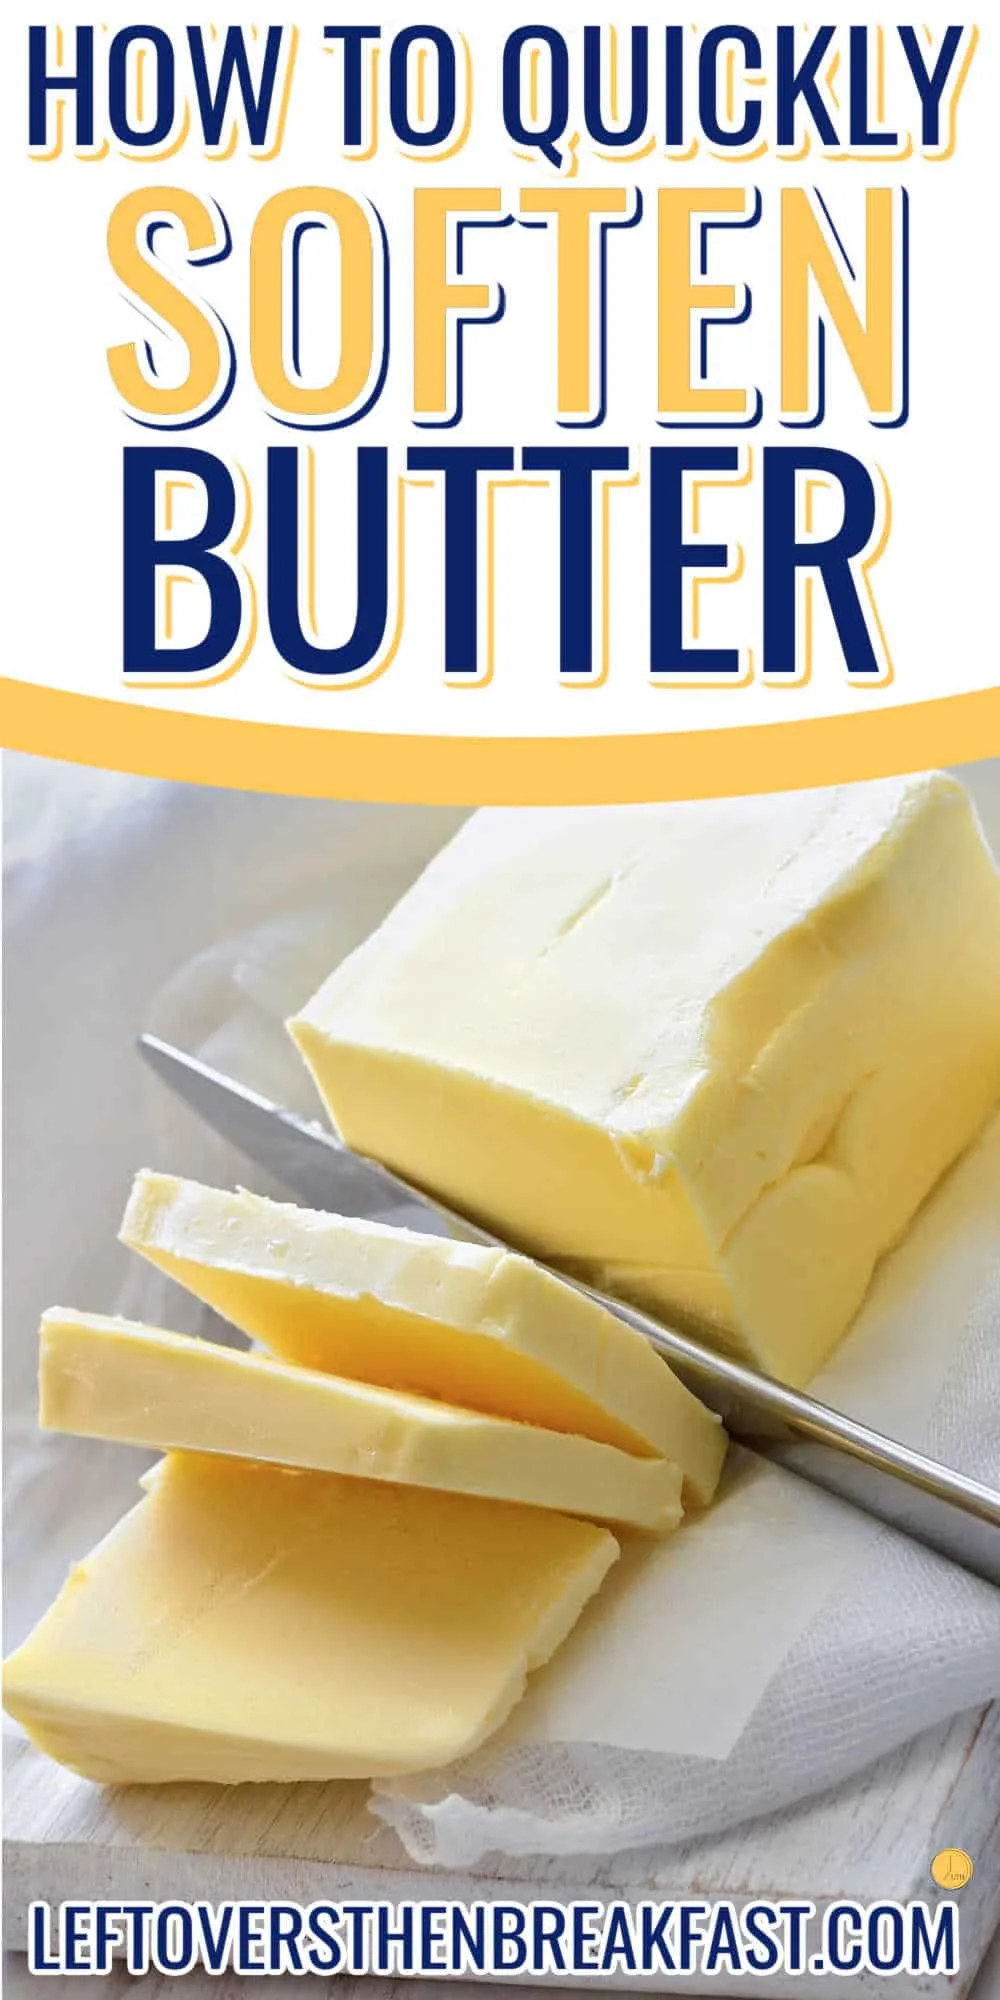 block of butter with knife cutting it and text in a white banner